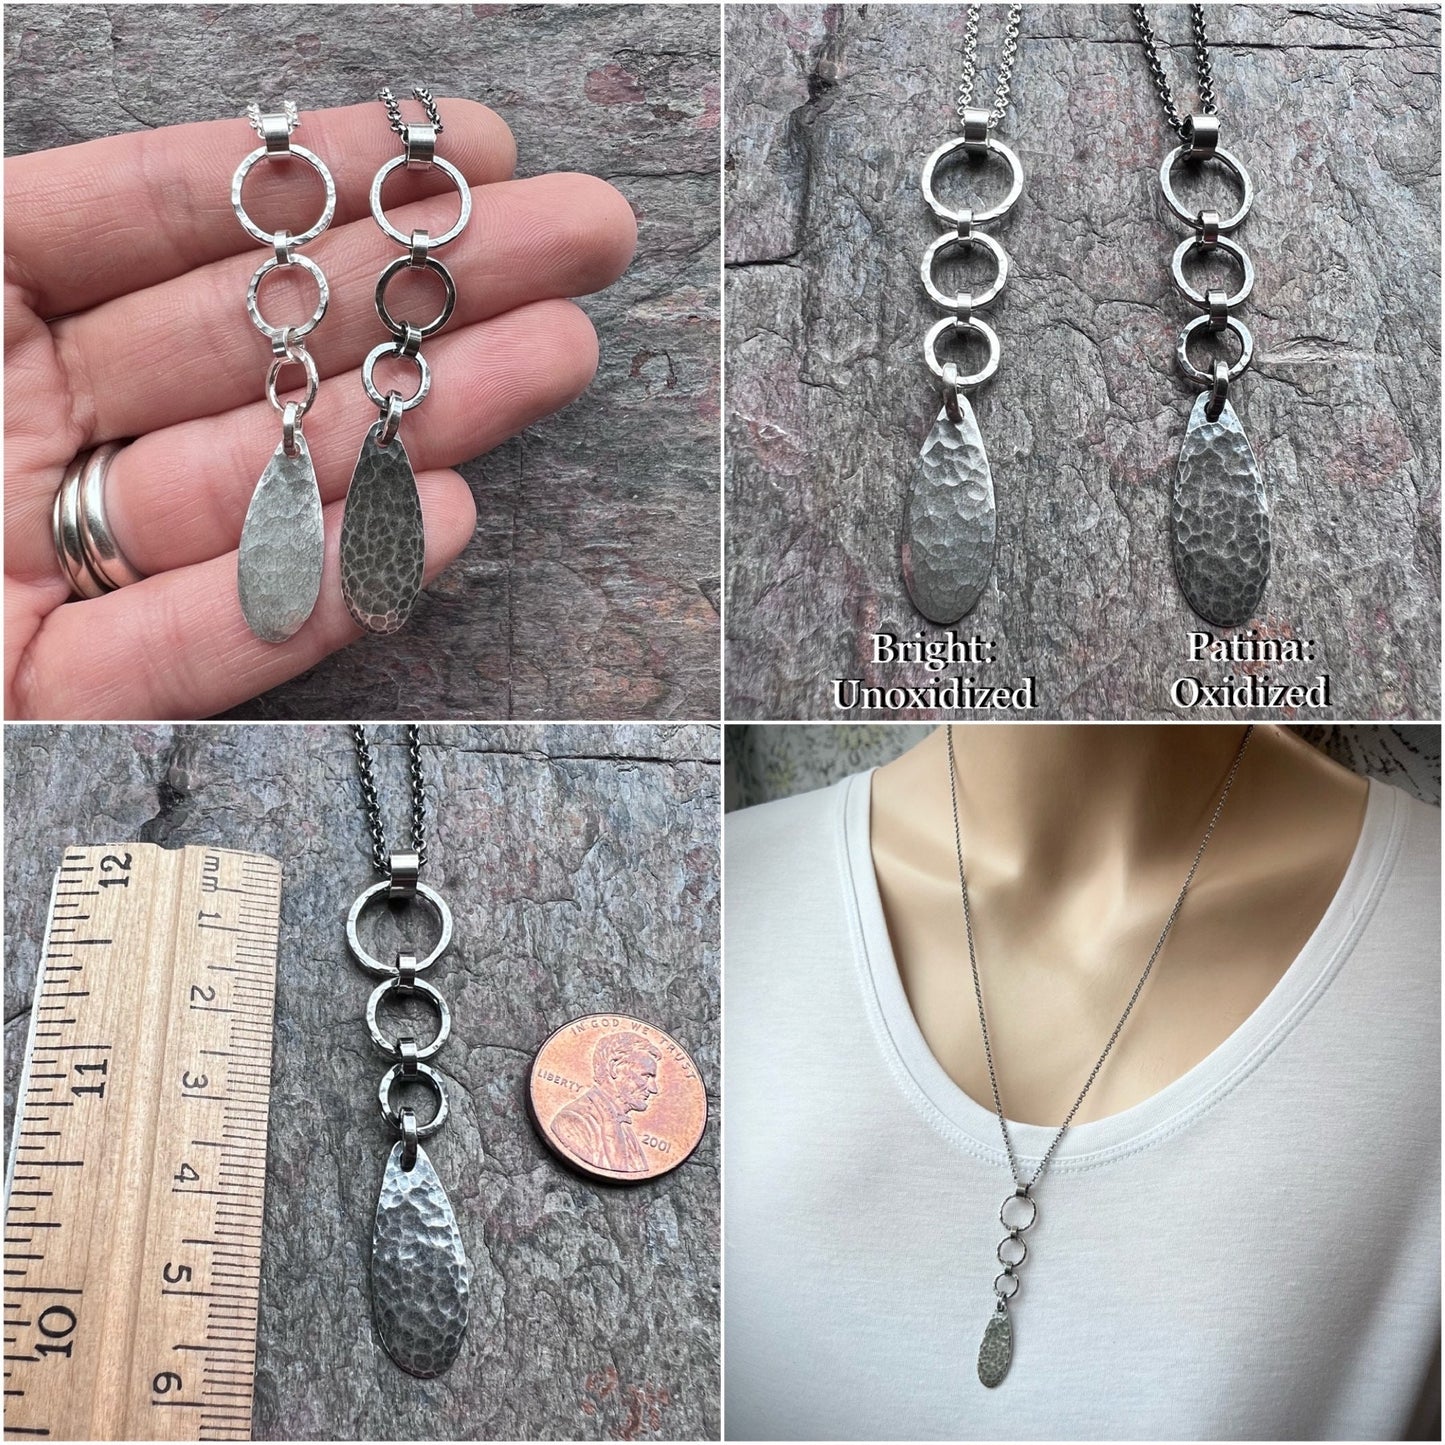 Sterling Silver Hammered Teardrop and Circles Necklace - Handmade Pendant on Sterling Silver Chain